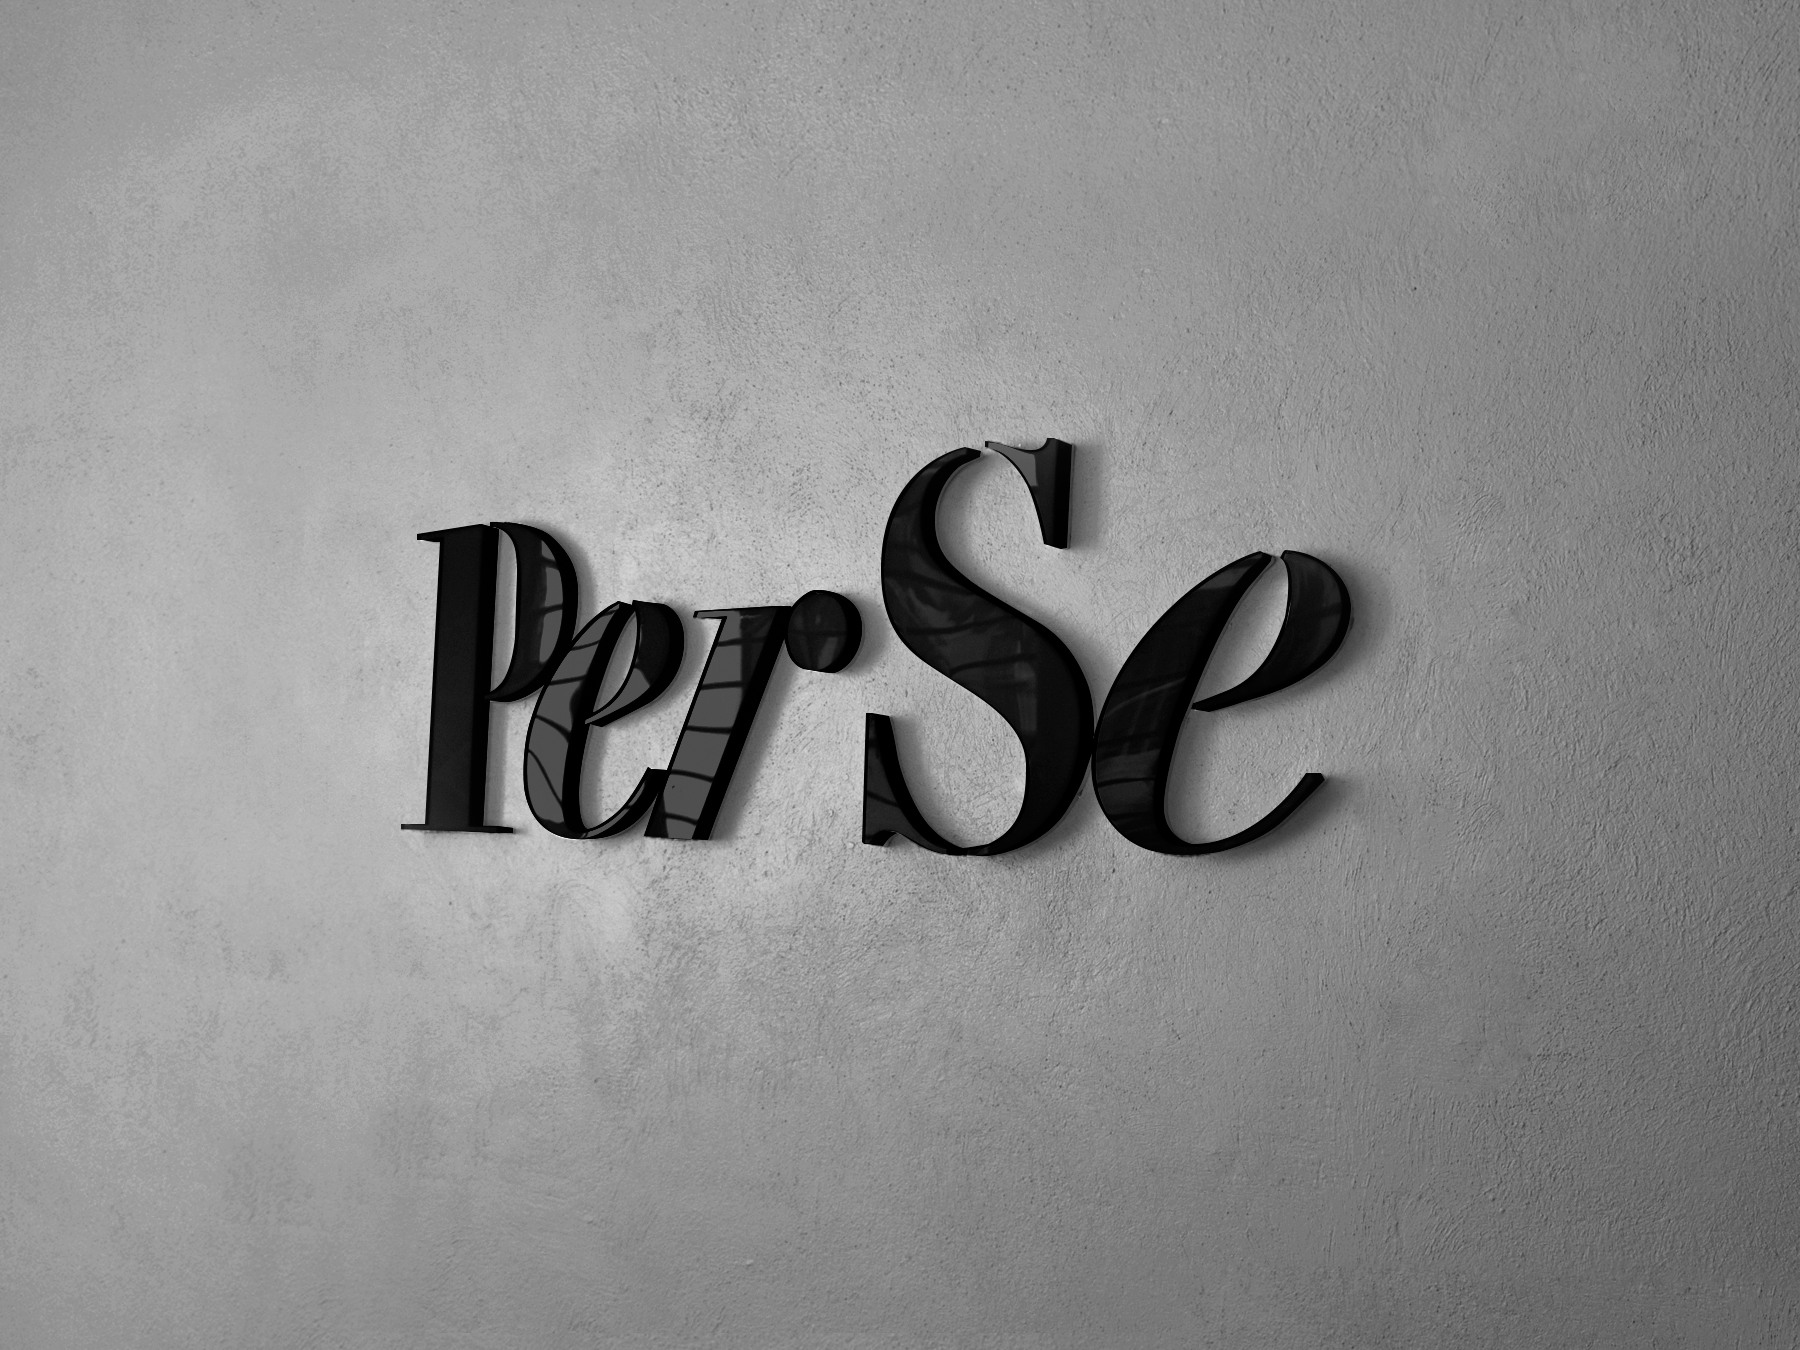 Perse_Pared2